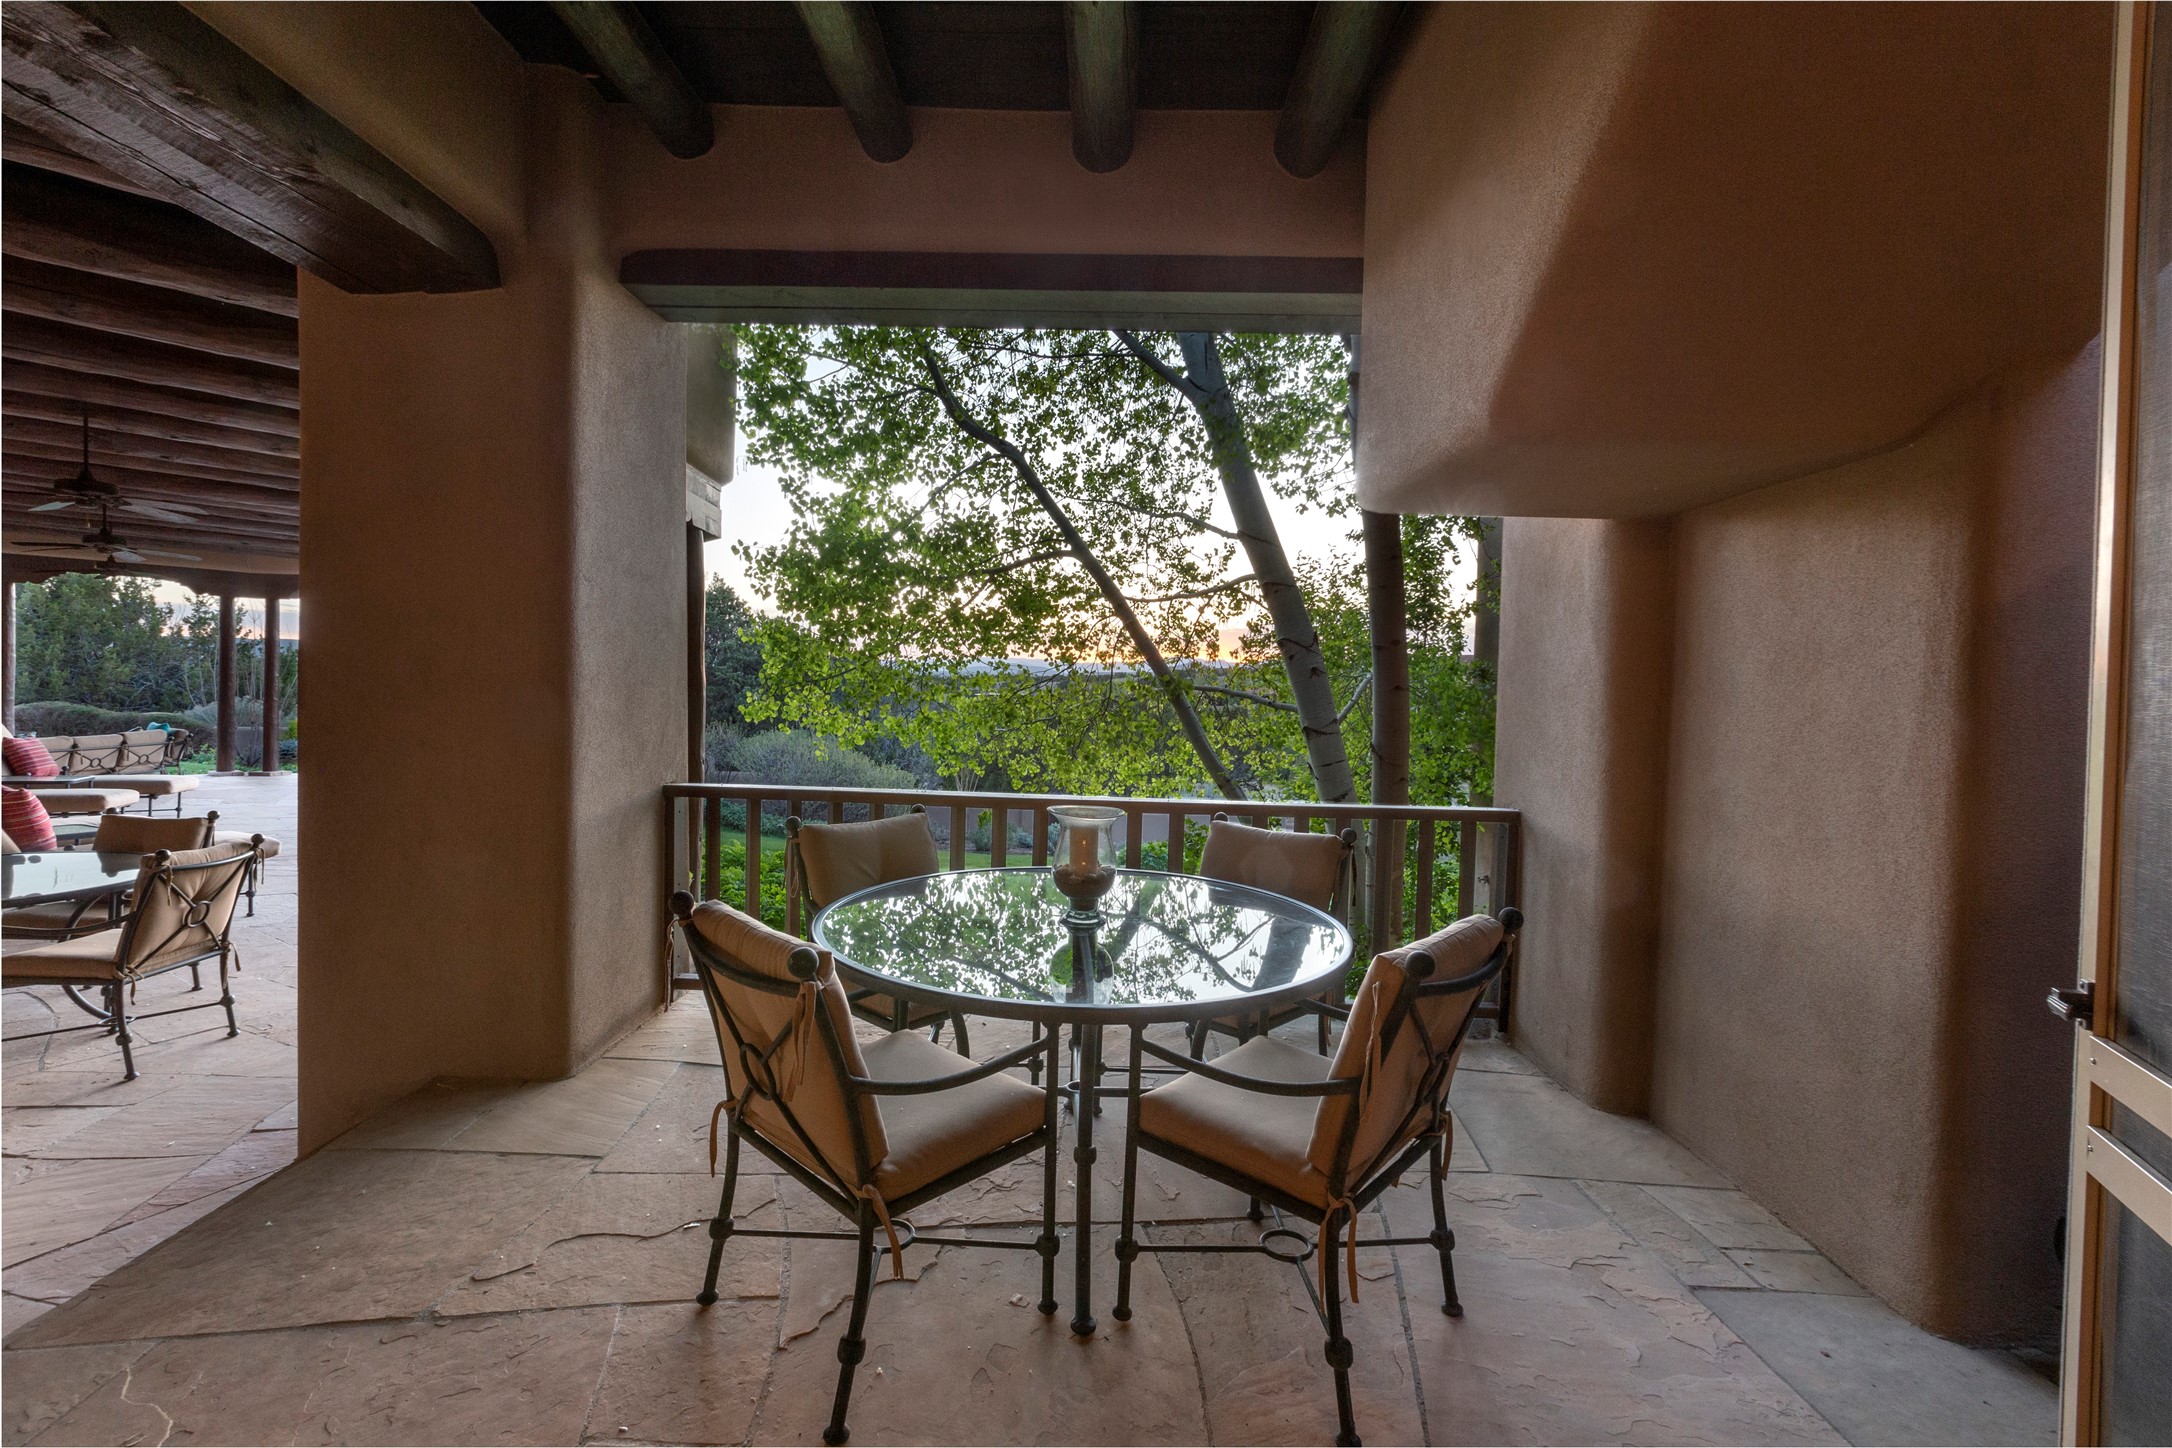 26 Stonegate Circle, Santa Fe, New Mexico 87506, 7 Bedrooms Bedrooms, ,8 BathroomsBathrooms,Residential,For Sale,26 Stonegate Circle,202336564